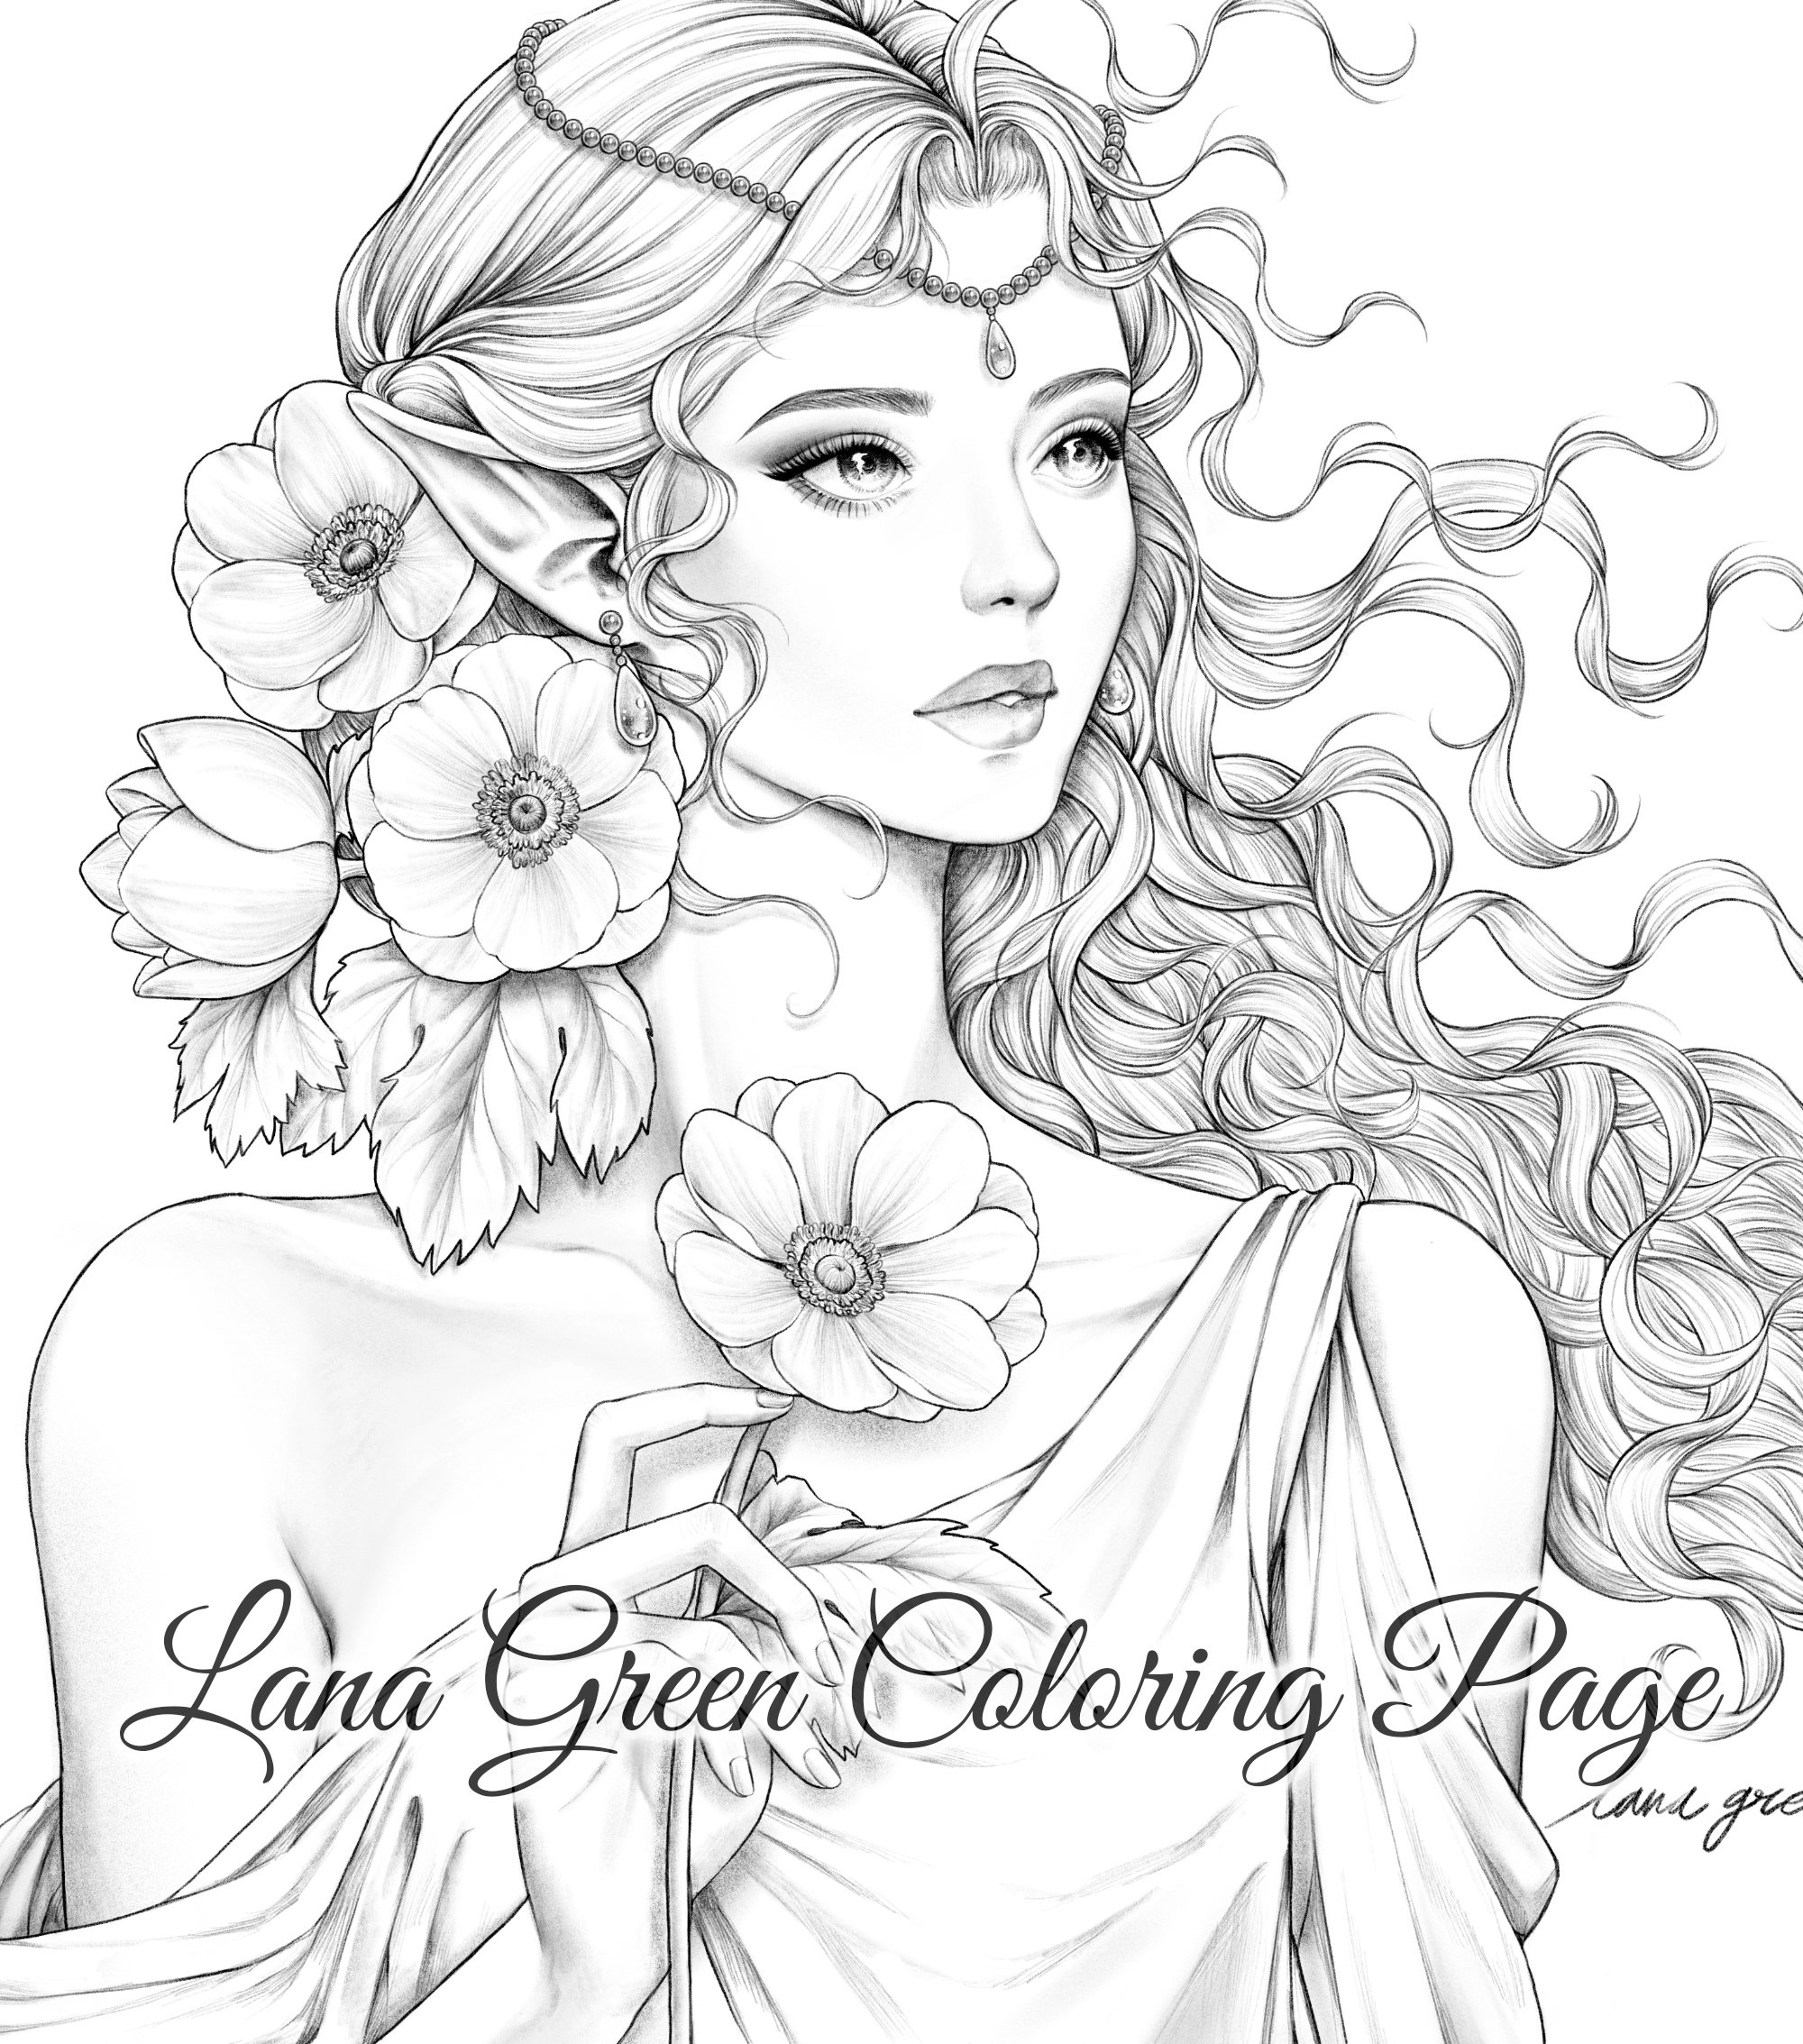 Anemone coloring page for adults grayscale coloring page instant download lana green art jpeg pdf